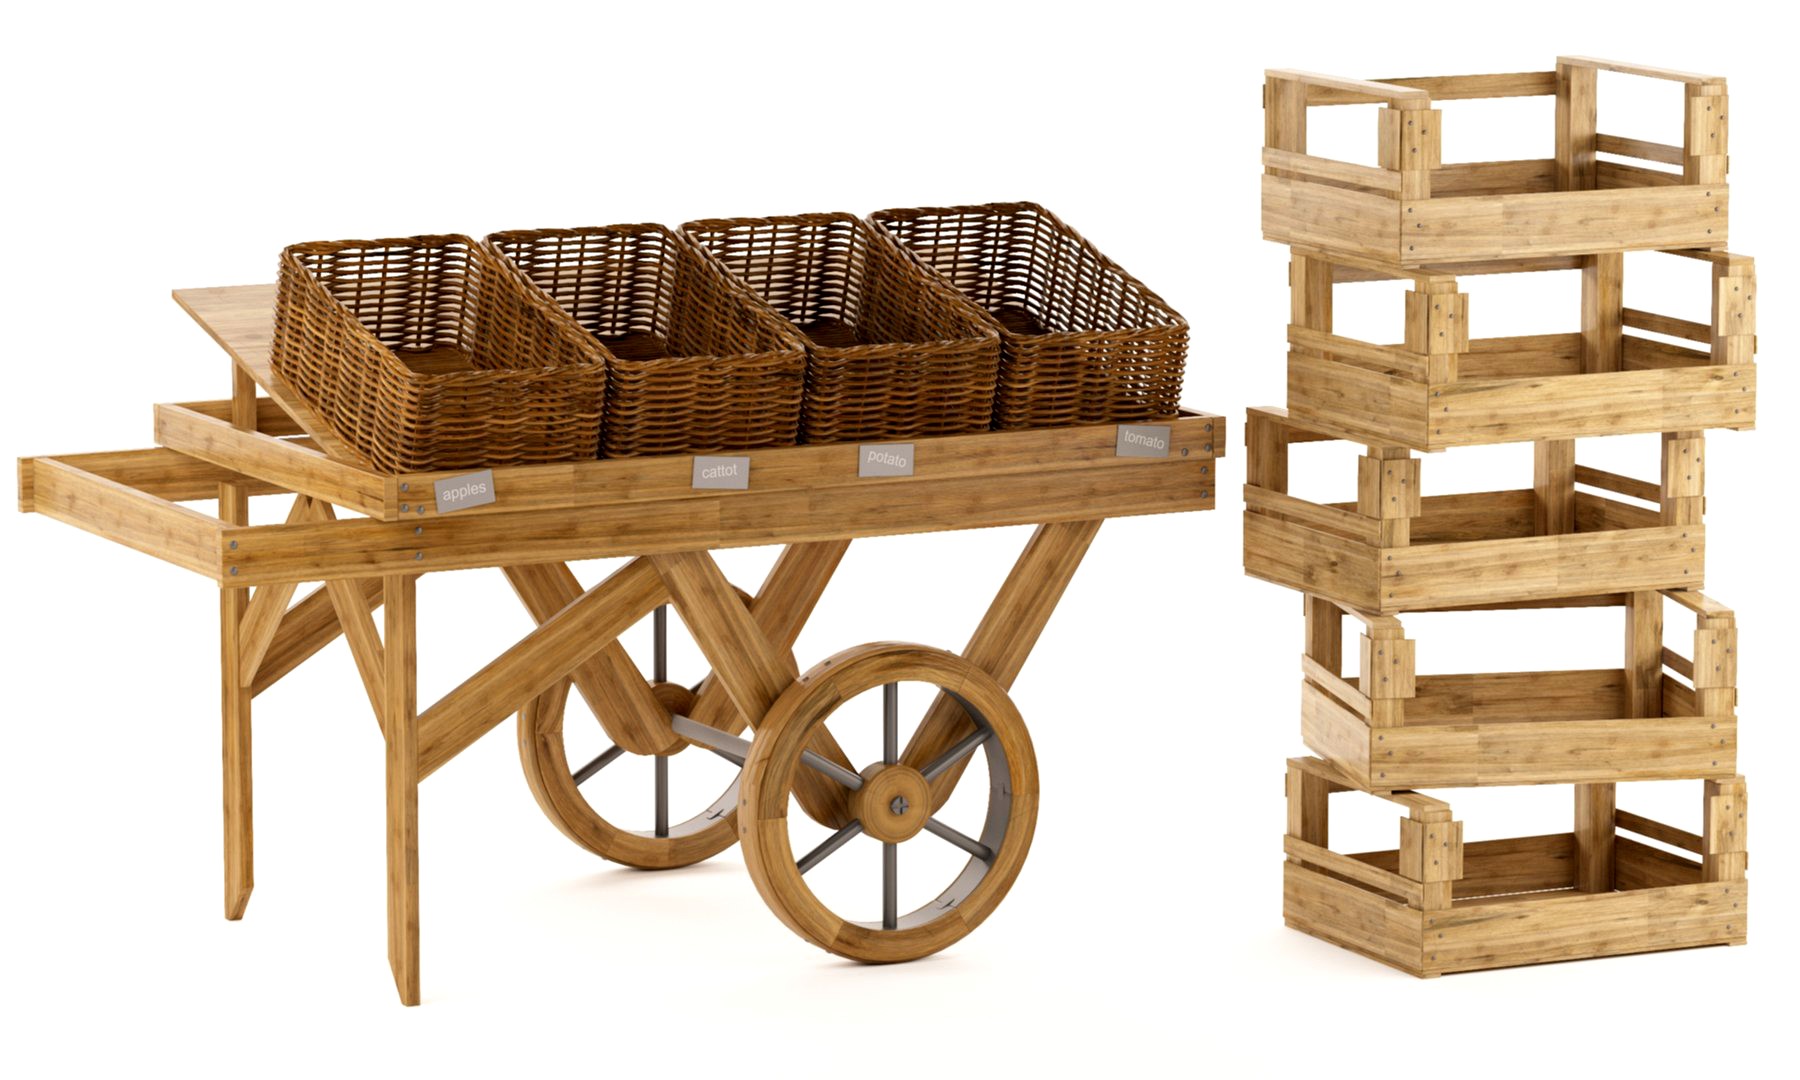 Wood trolley and crates